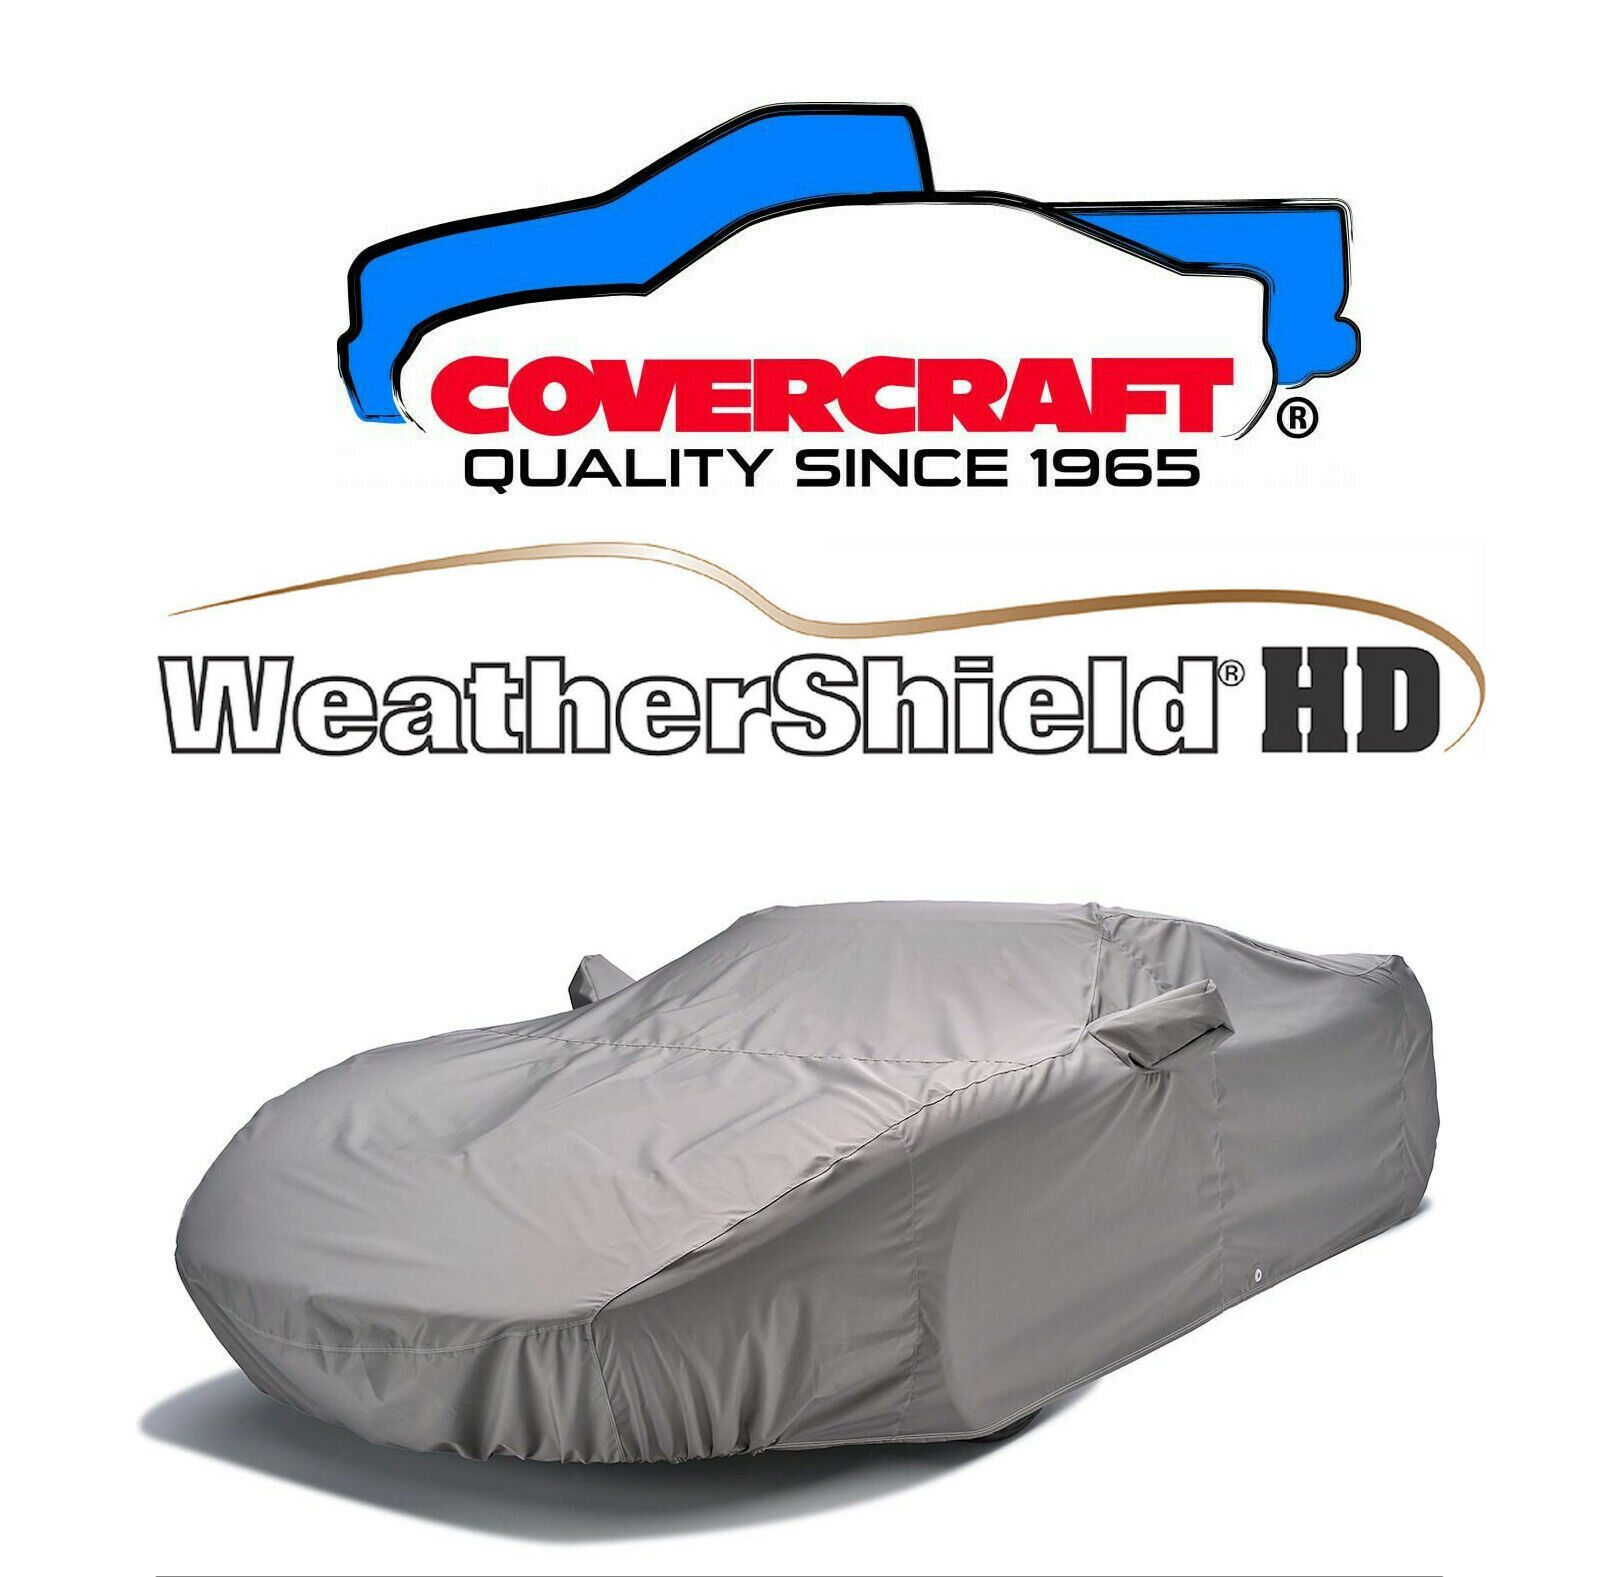 Covercraft Weathershield HD Car Cover 2014 to 2019 Corvette C7 Stingray IN STOCK